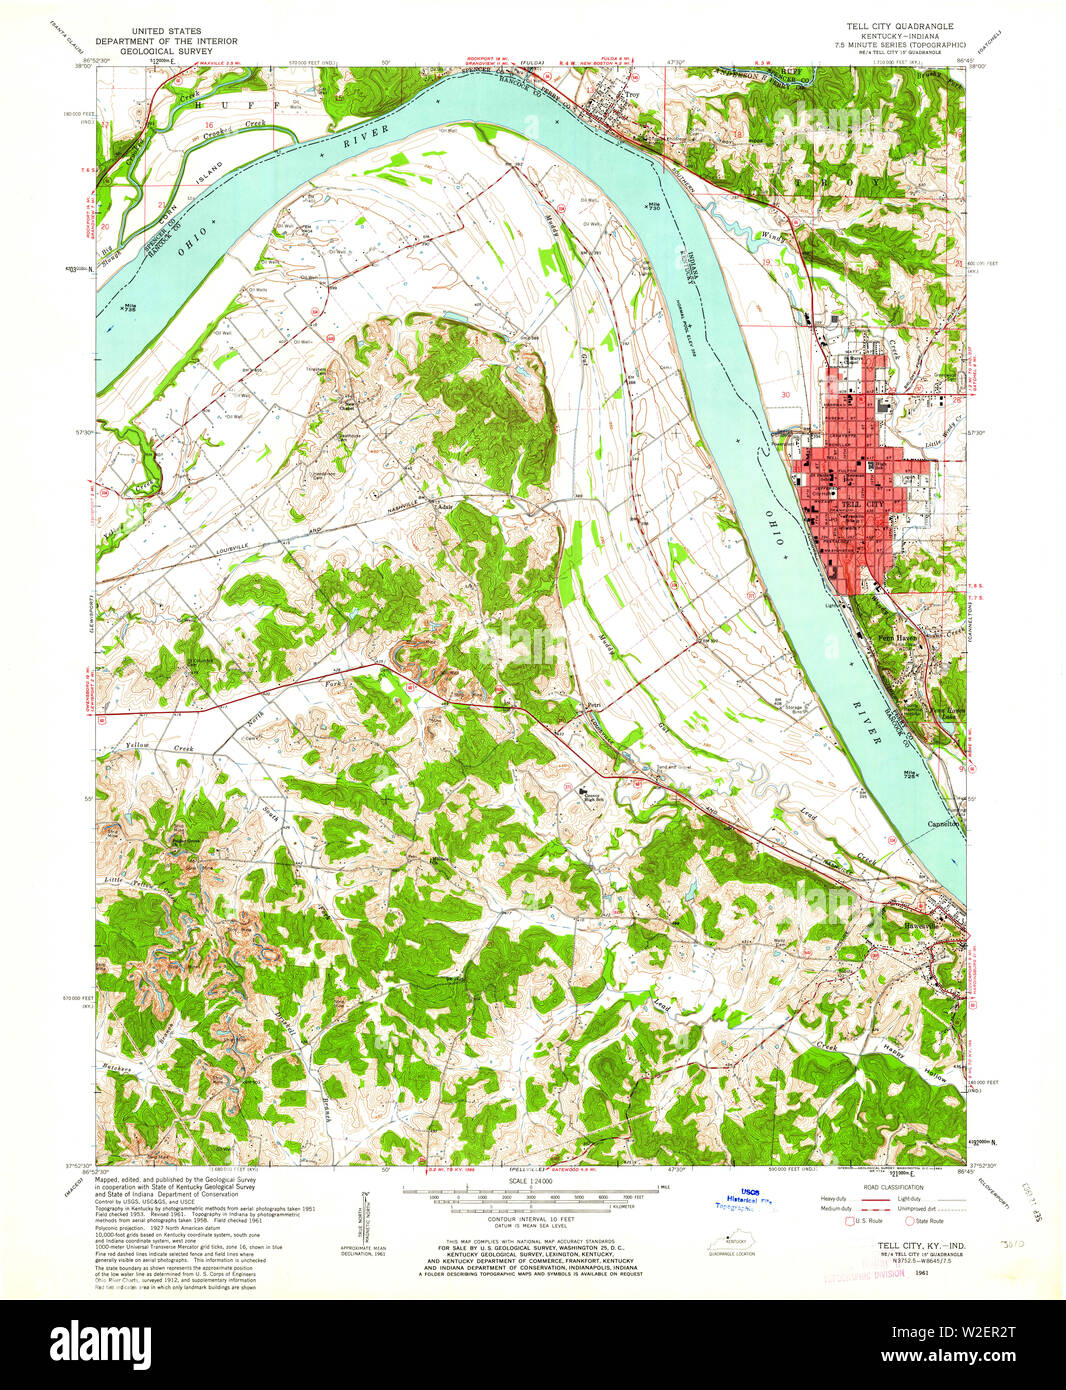 Usgs Topo Map Indiana In Tell City 161015 1961 24000 Restoration